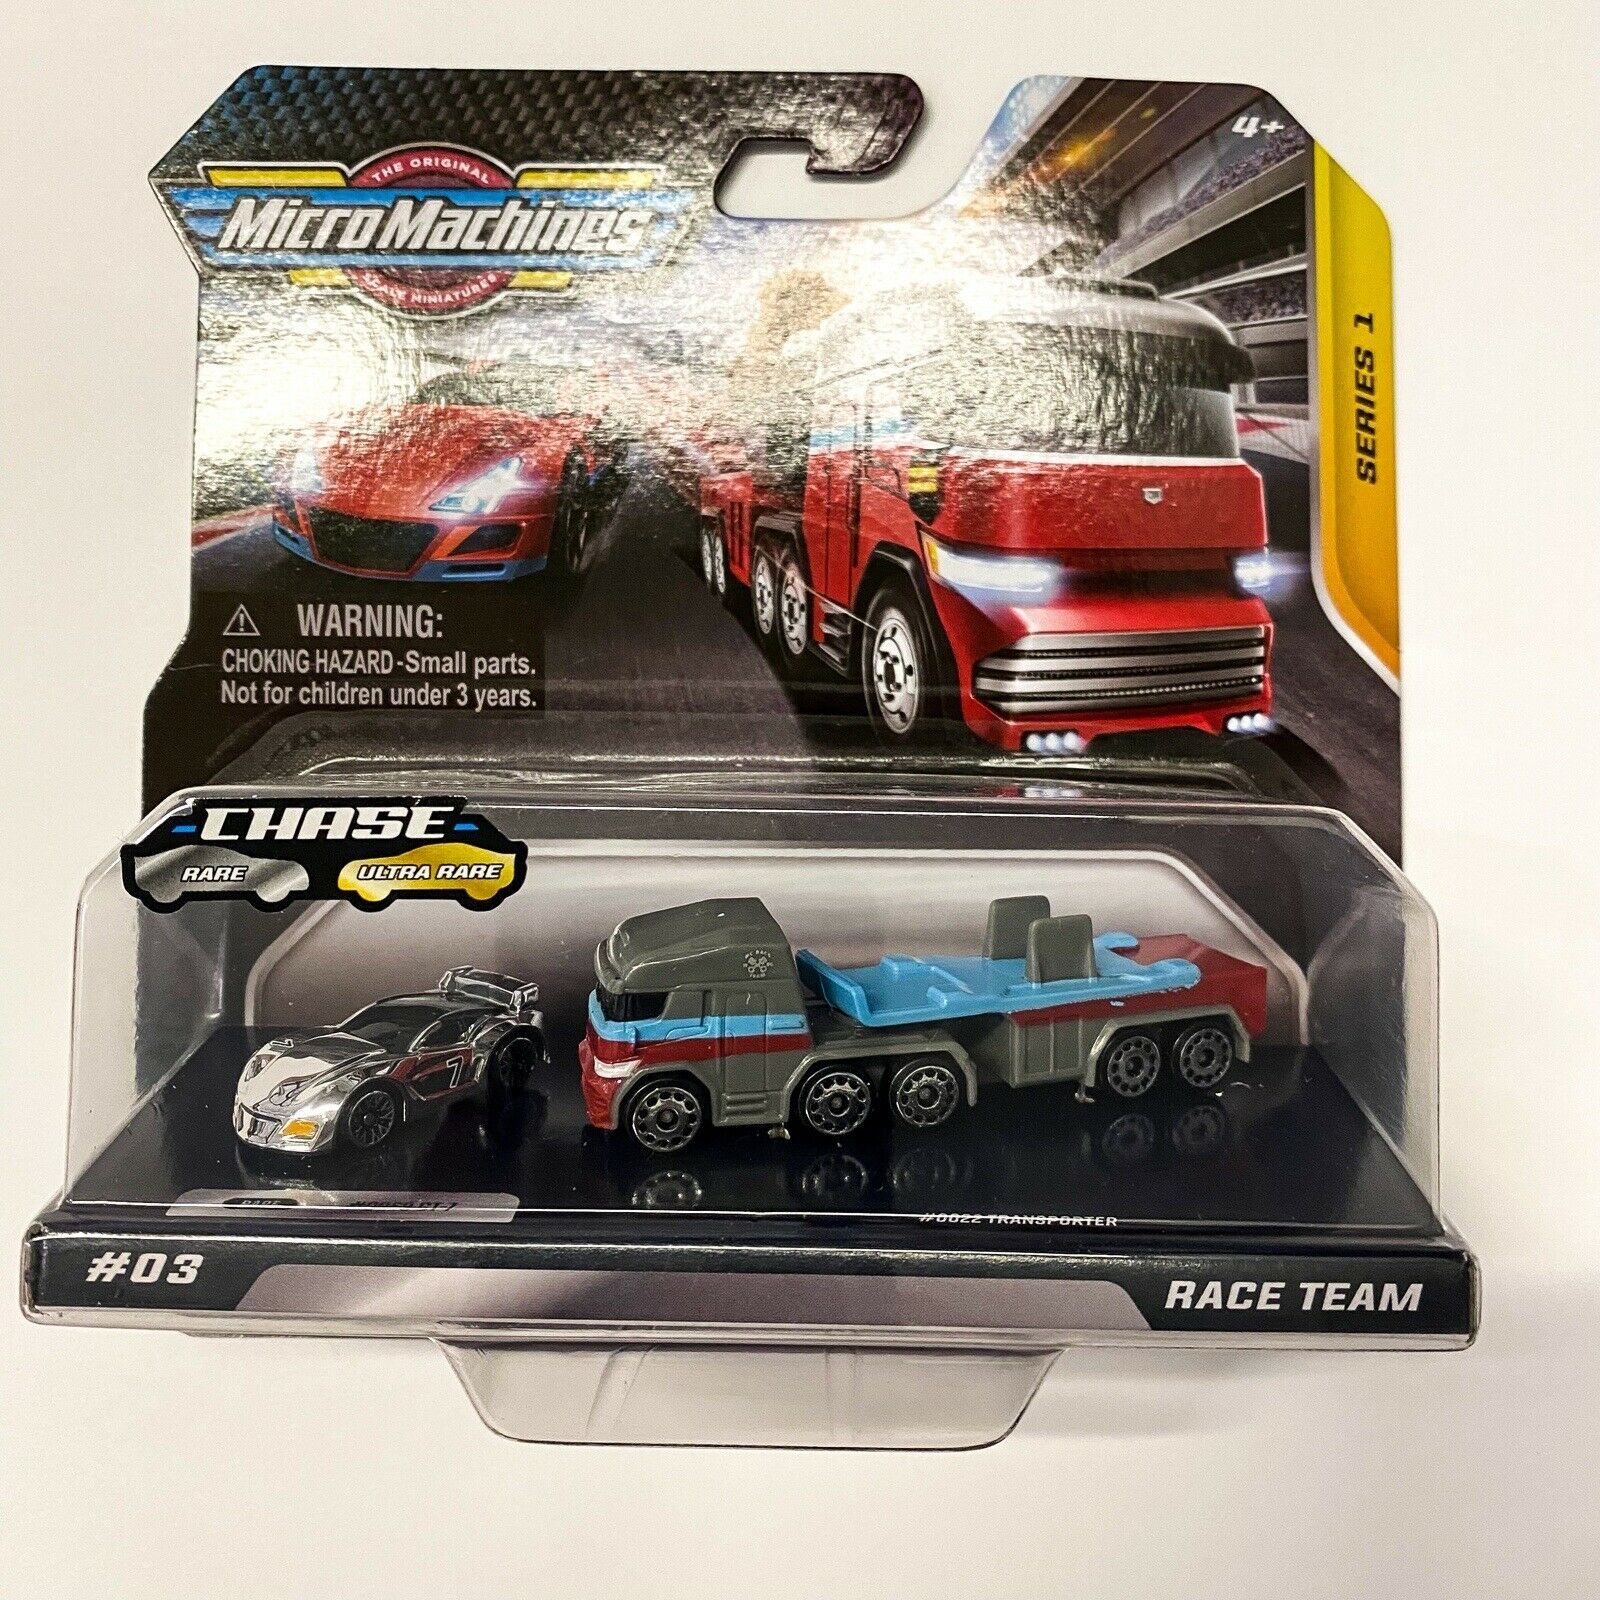 New Micro Machines Series 1 Race Team Set Chrome Rare Chase #03 GT-7 Transporter - £11.92 GBP